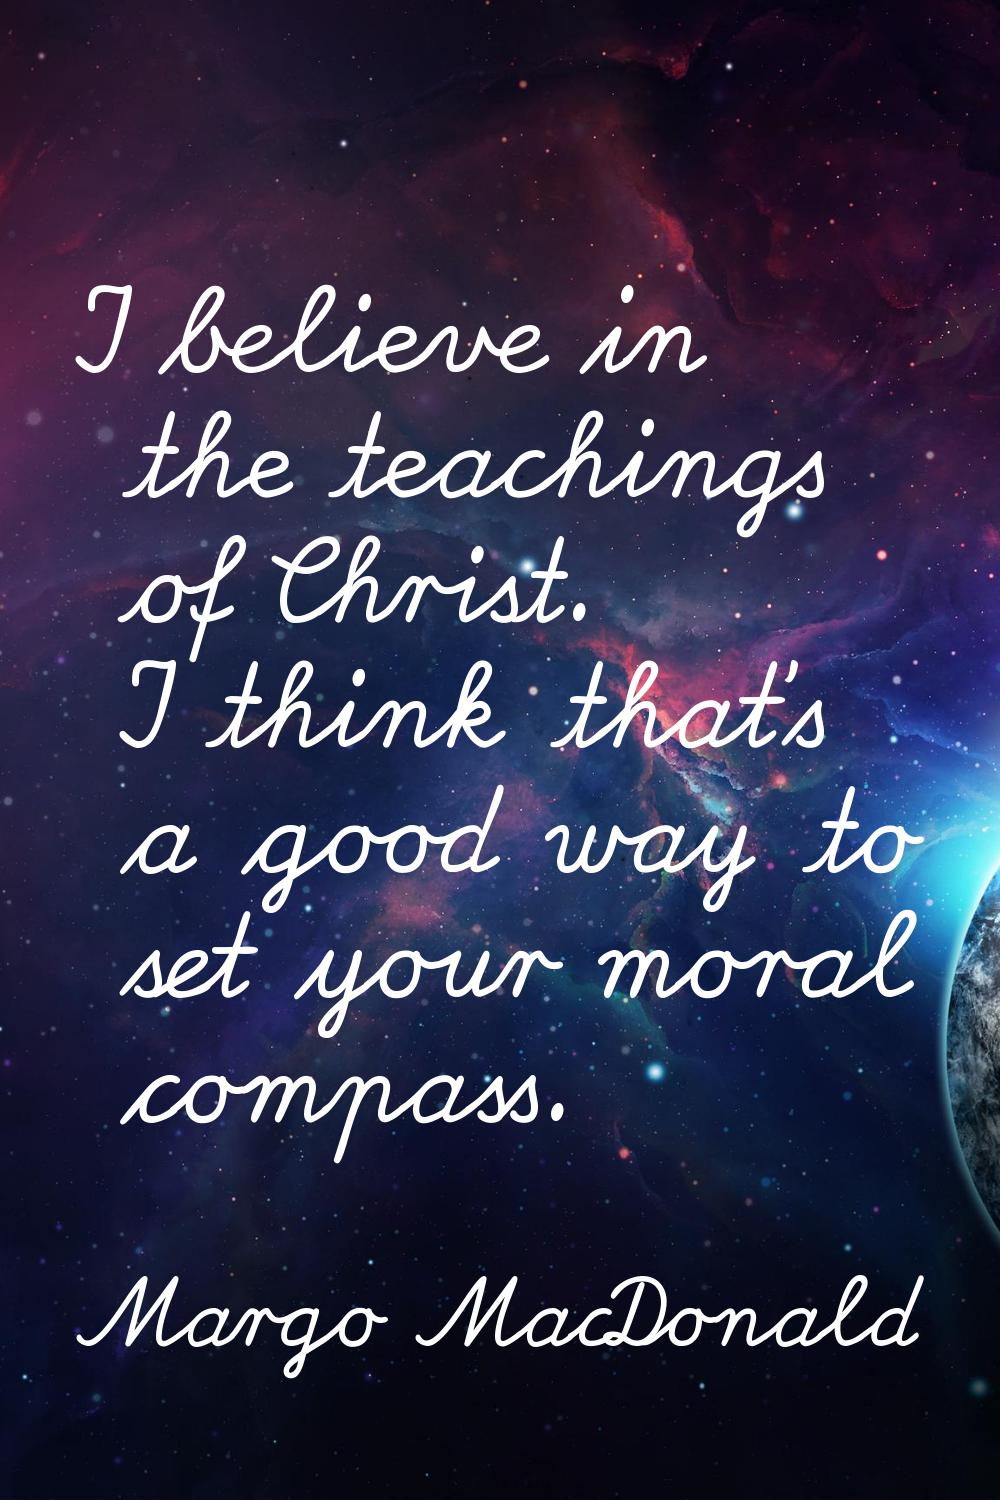 I believe in the teachings of Christ. I think that's a good way to set your moral compass.